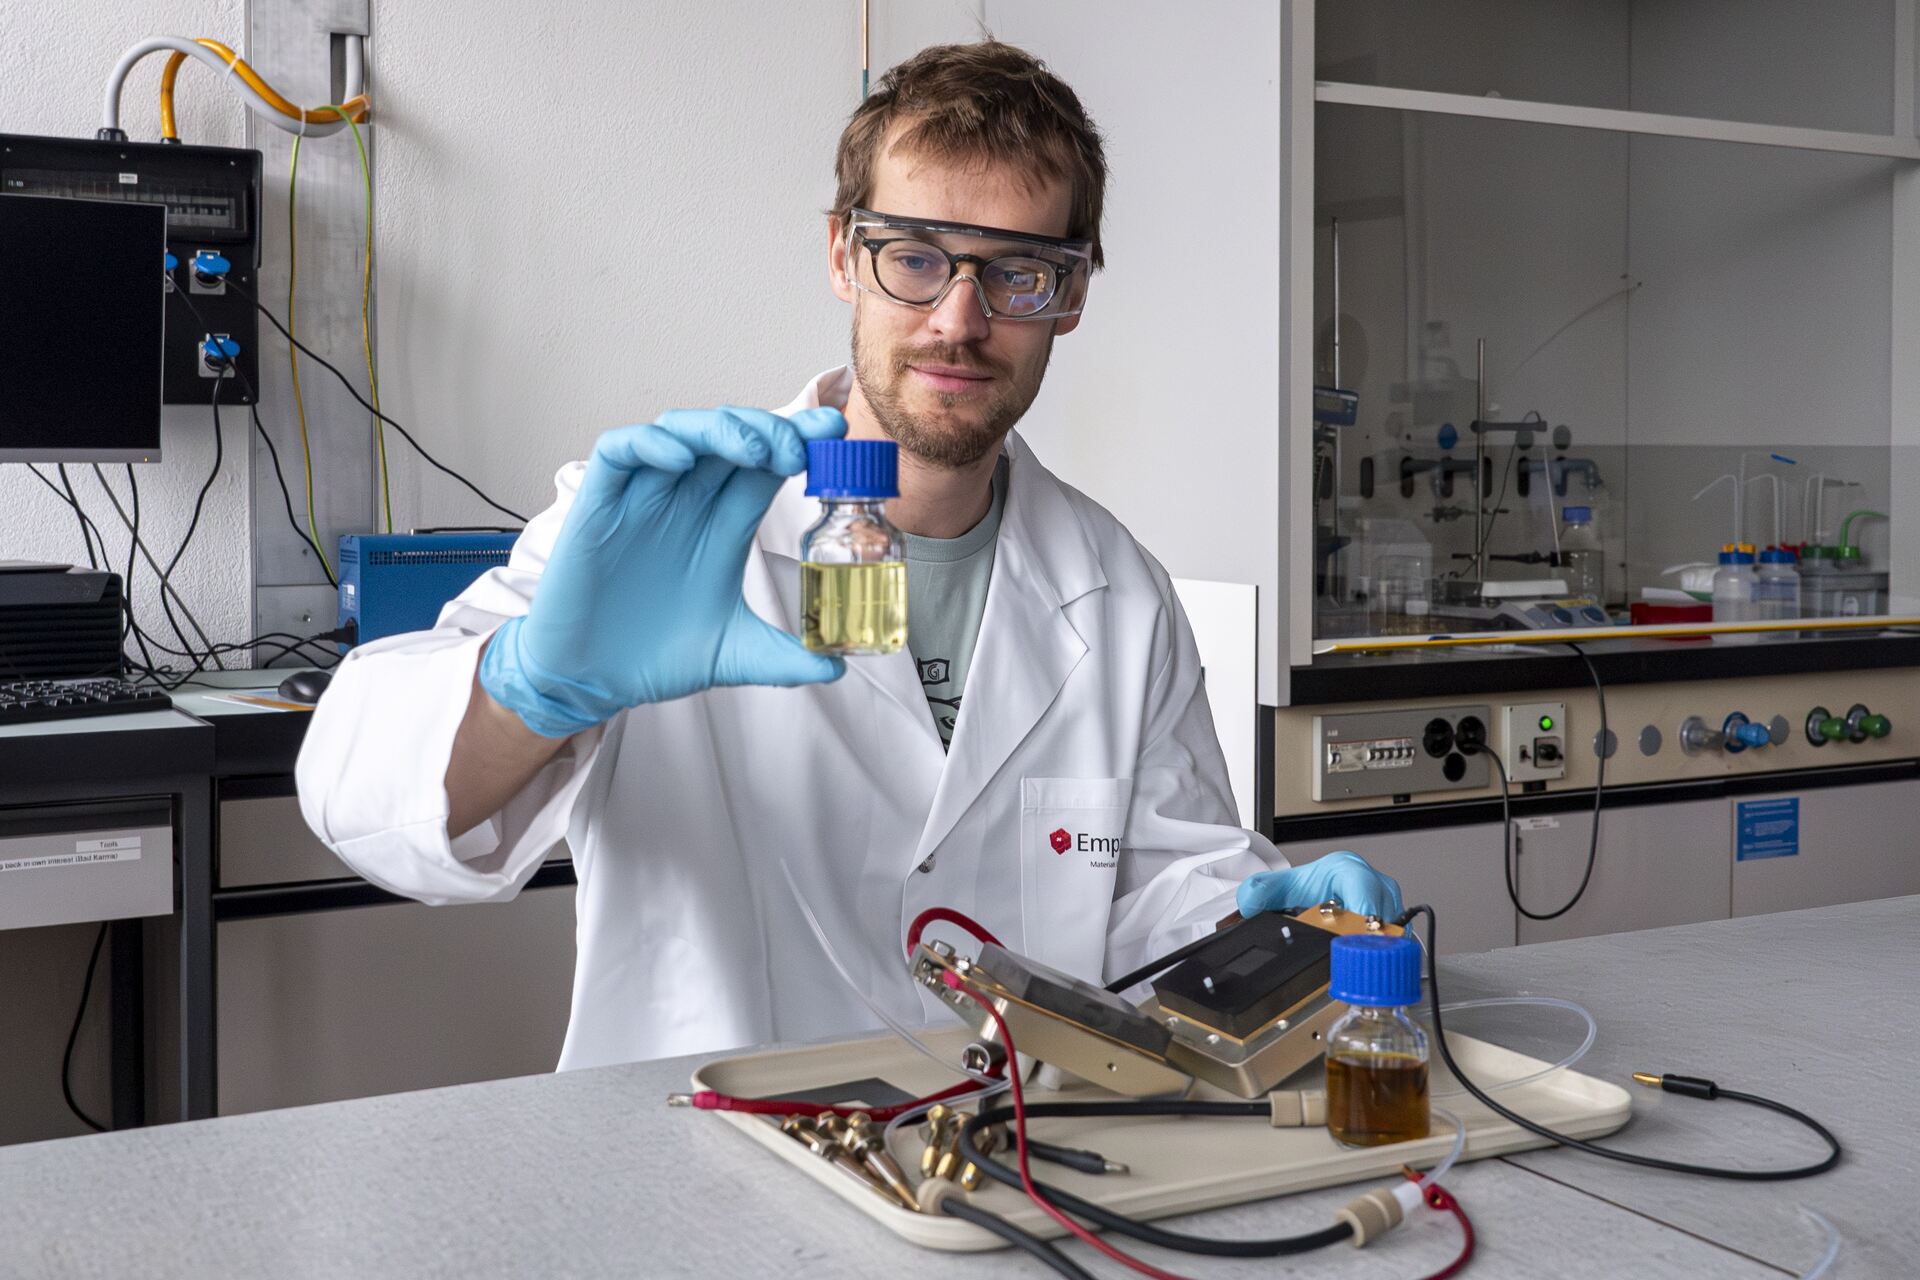 Batteries: David Reber, a young researcher at EMPA in Switzerland, intends to completely decouple energy storage from the electrolyte solution to modernize traditional water-based flow battery concepts